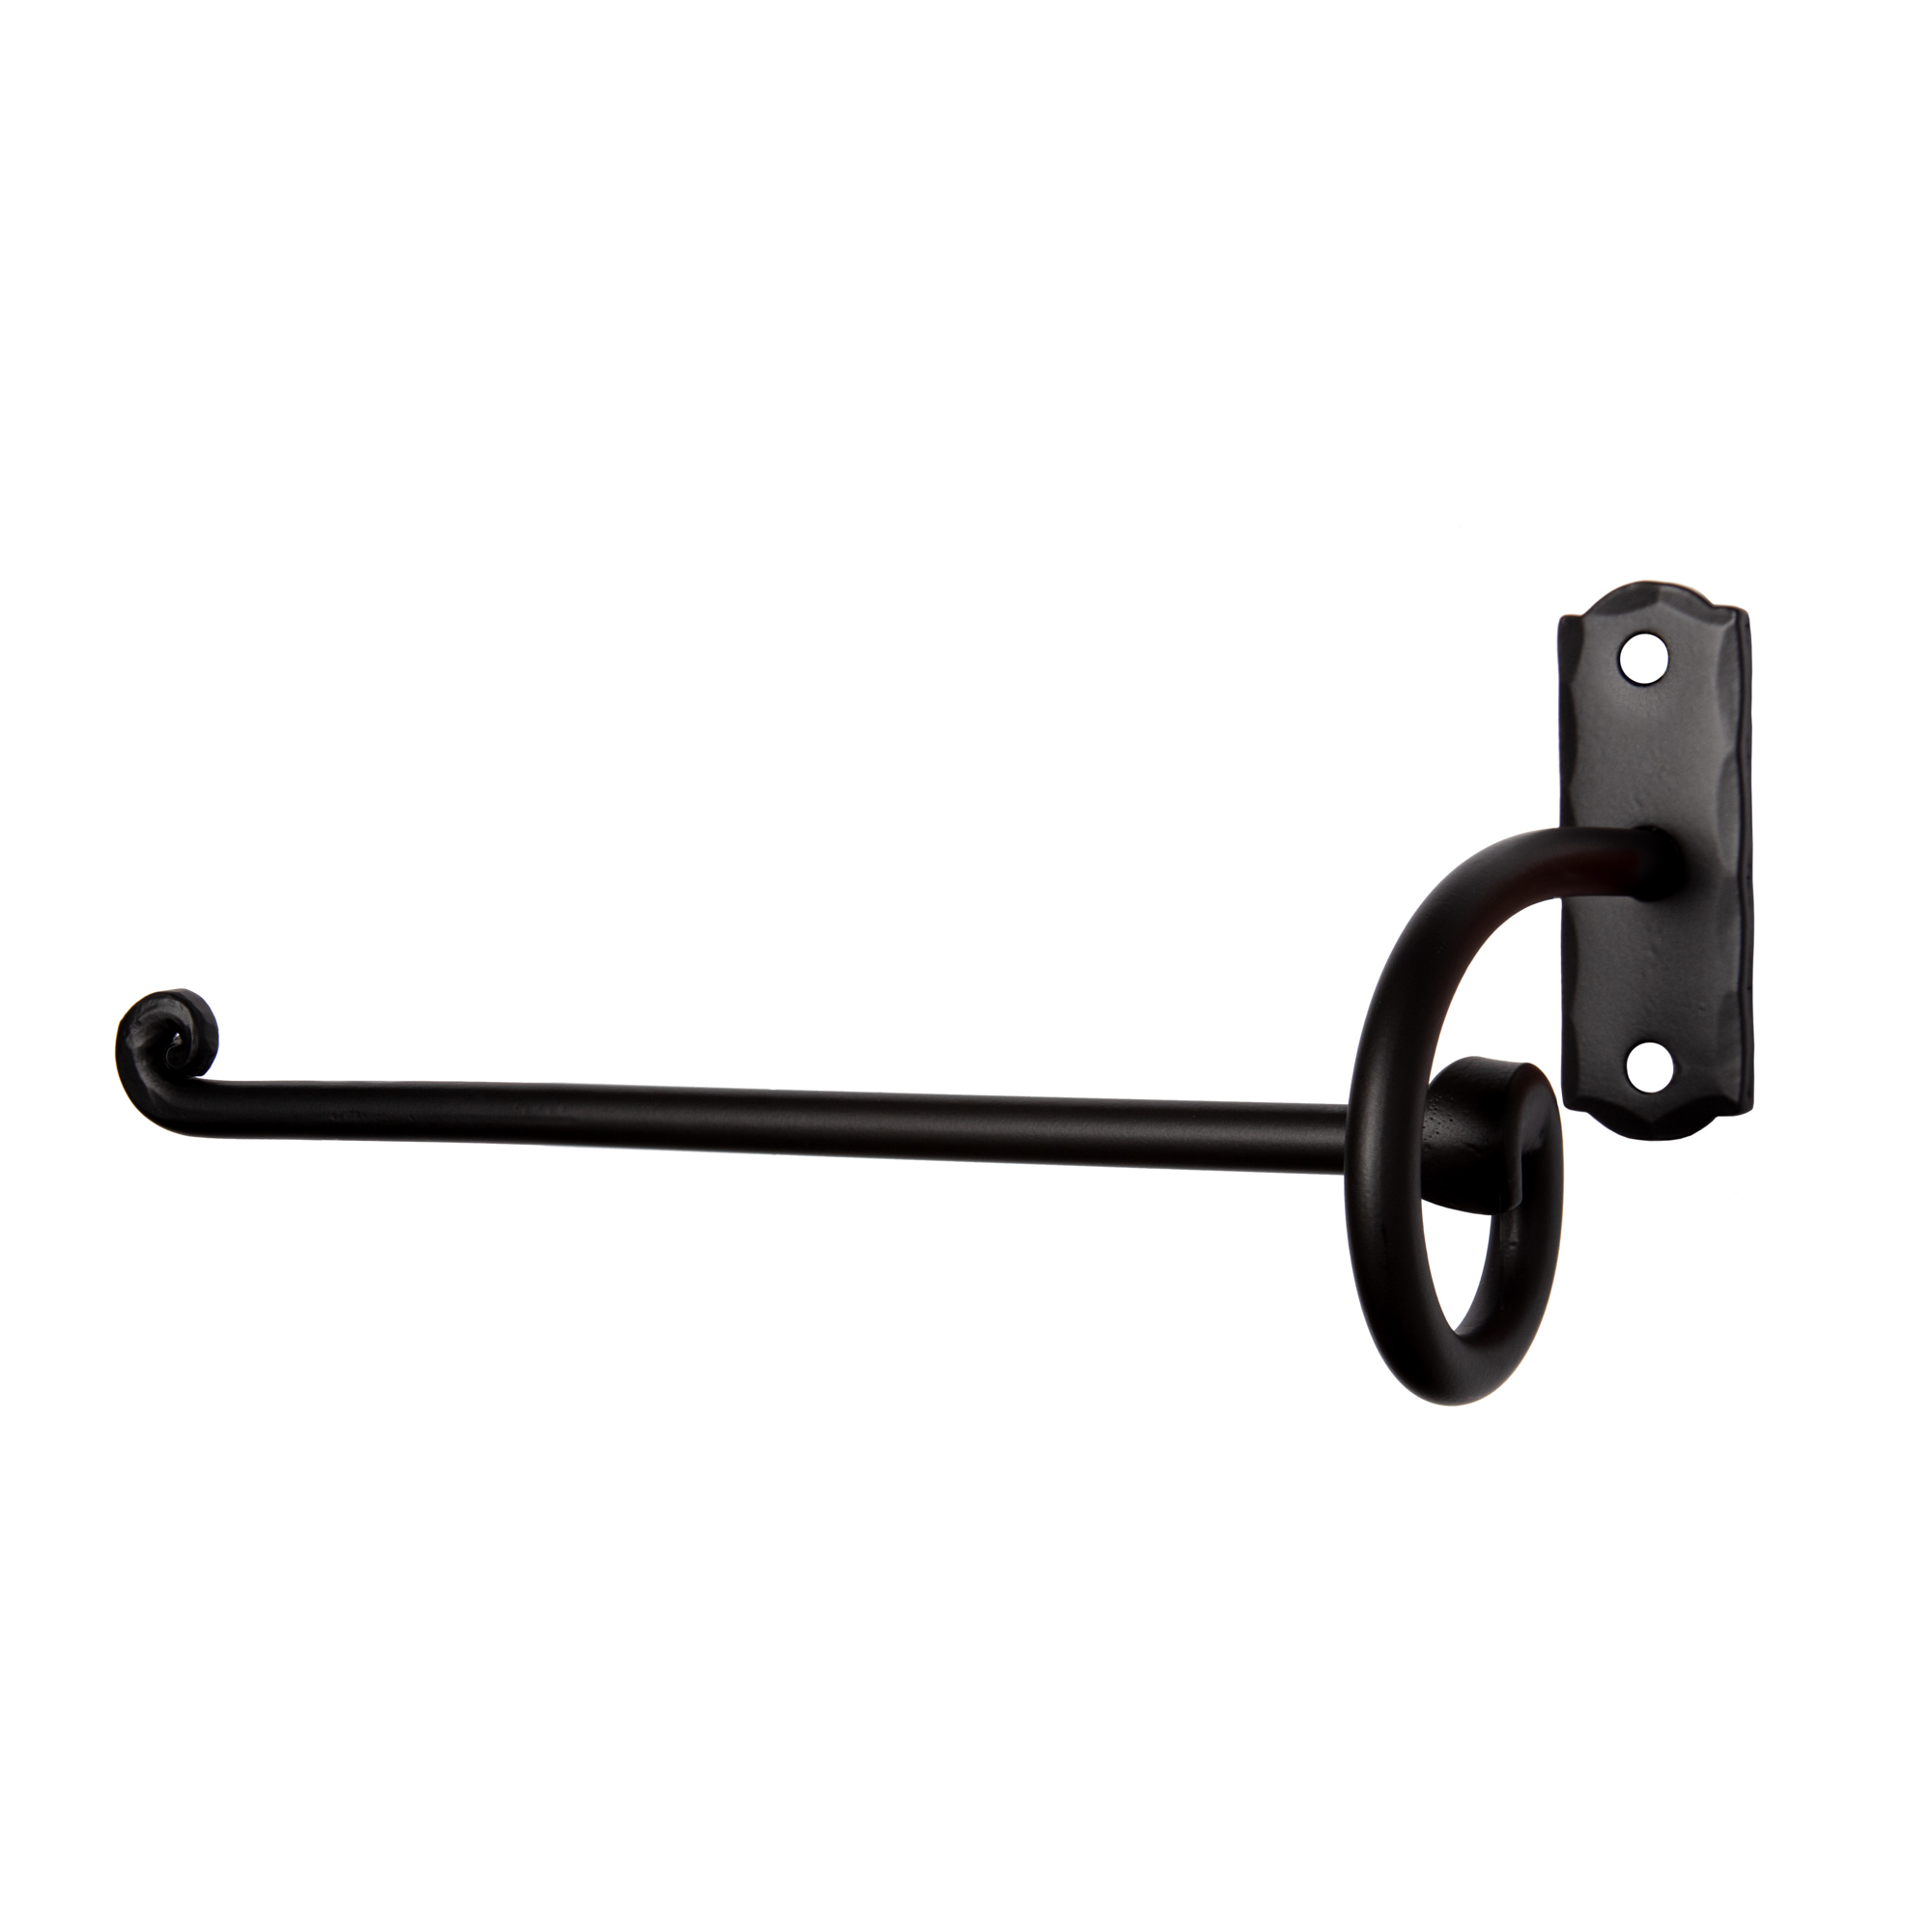 Hand Forged Wrought Iron Hand Towel Bar (left)